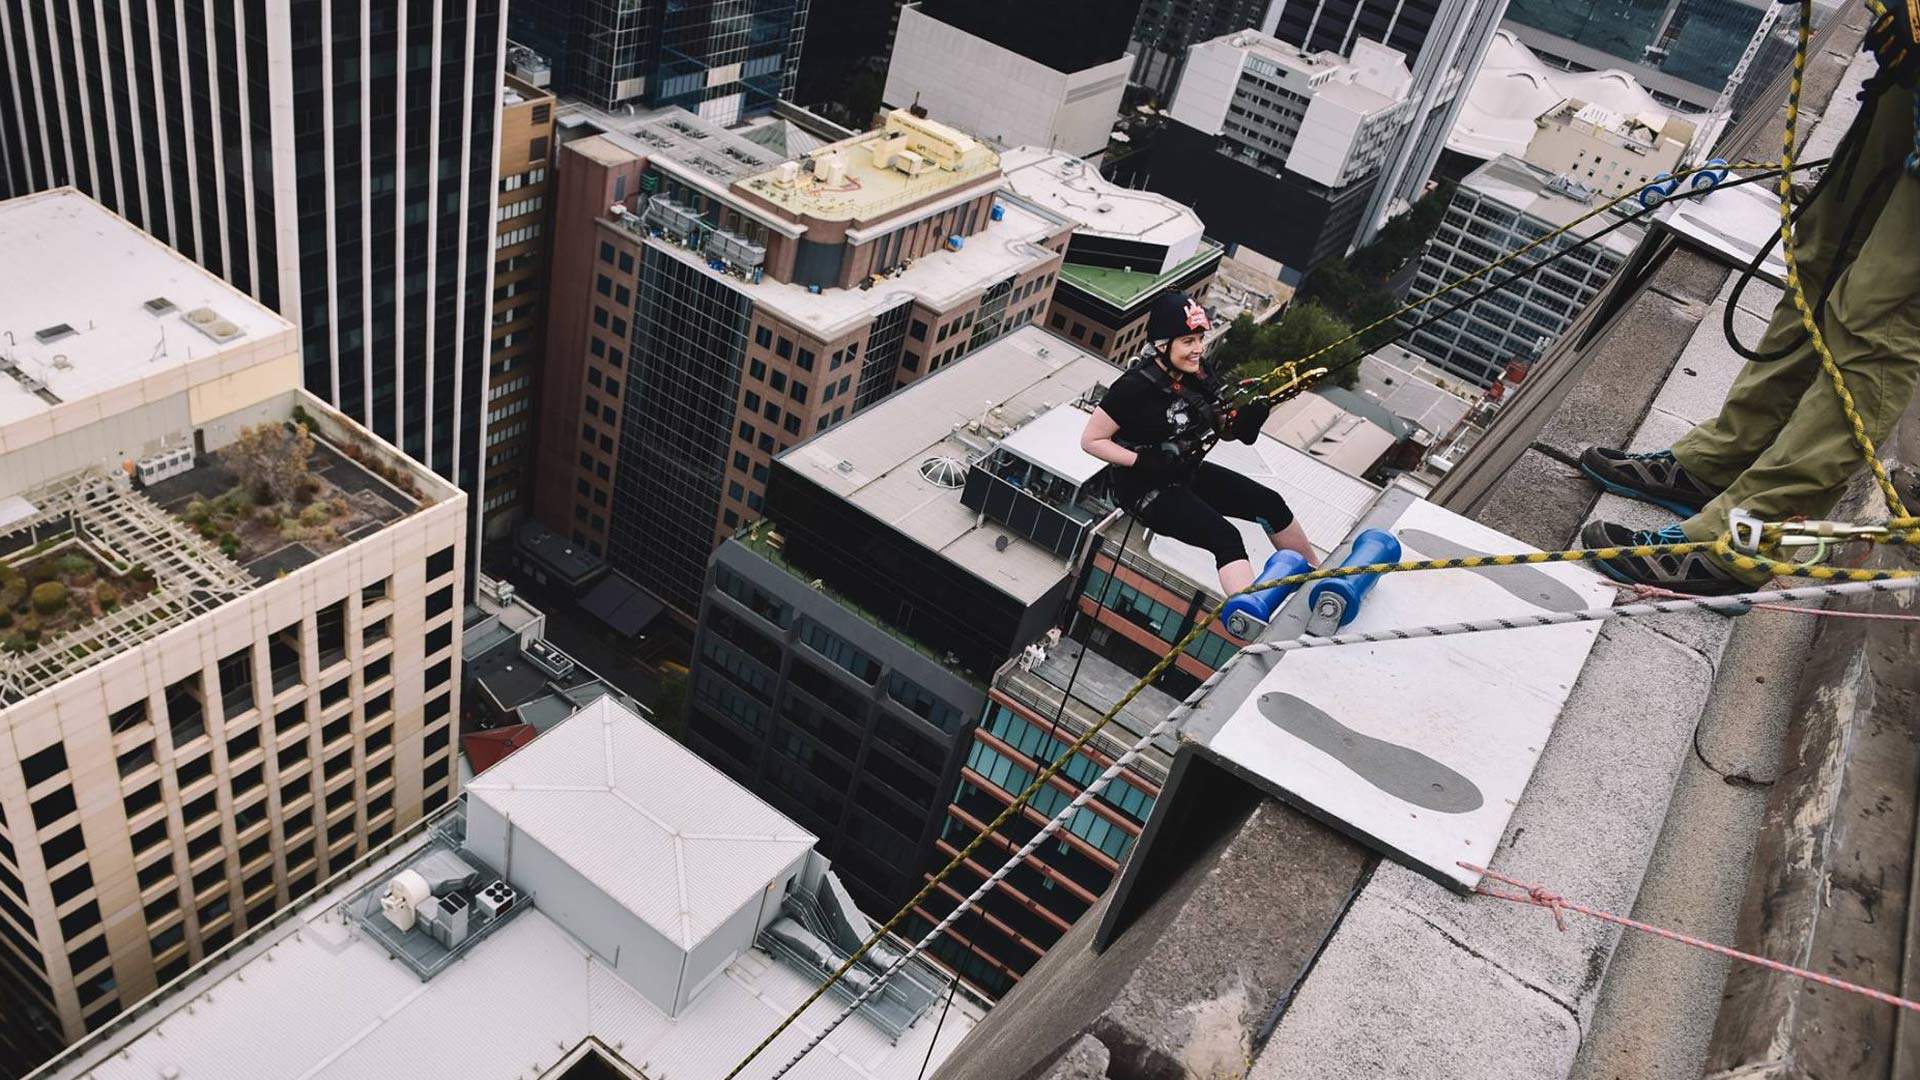 Melburnians Will Soon Be Able to Abseil Down a 27-Storey CBD Skyscraper